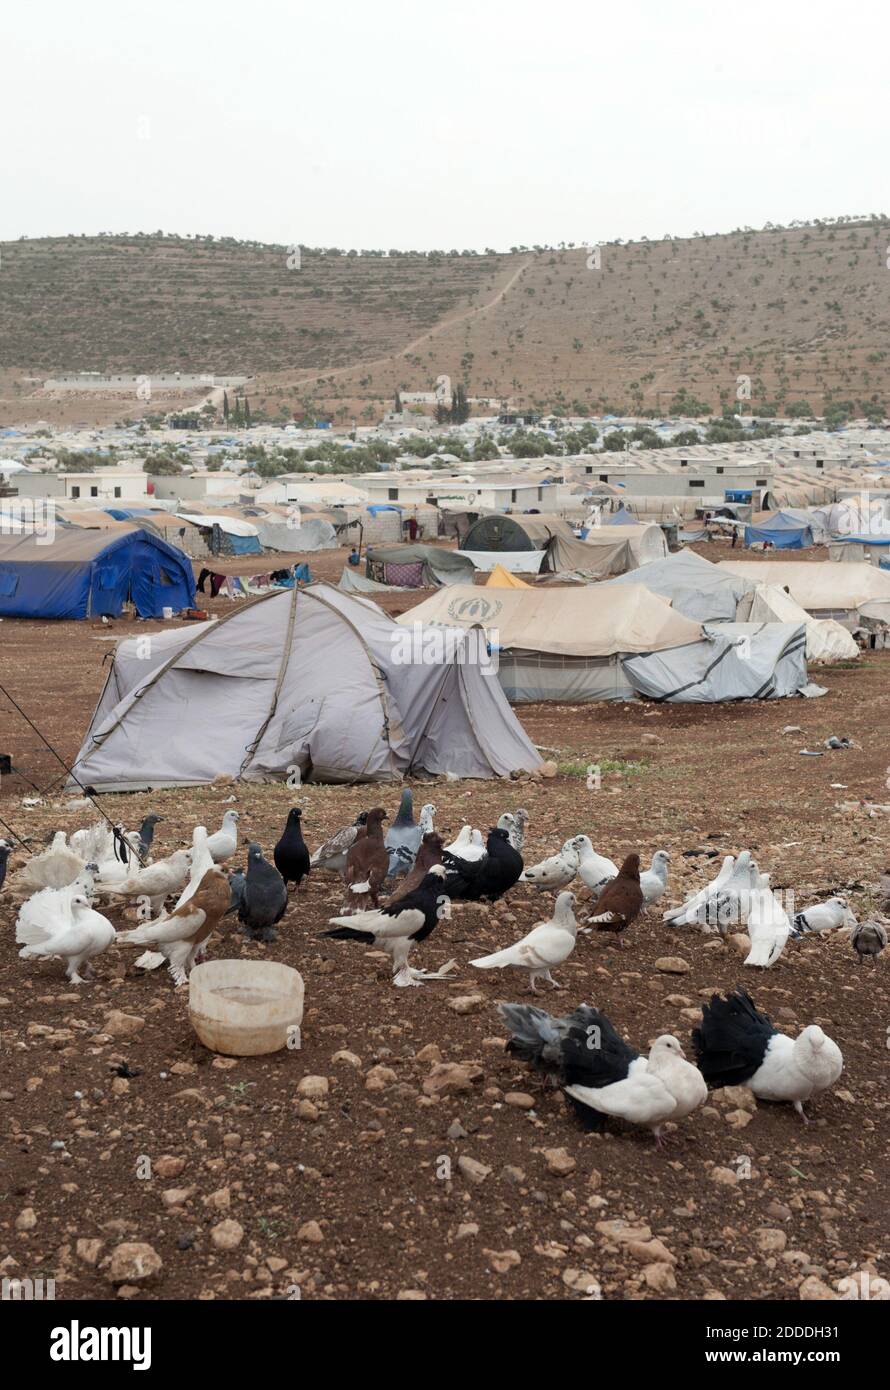 NO FILM, NO VIDEO, NO TV, NO DOCUMENTARY - At the 'Hands of Cooperation' camp, or Alta'awan, for Syrians fleeing the barrel-bombing and artillery attacks on their towns and villages, some 4,000 people live in squalid conditions. It is the world's biggest humanitarian crisis, but no one in the international community has oversight or responsibility. By some counts, half the population of Syria has fled its homes to escape violence. But thereês little attention to the tragedy. Bab Al Awa, Syria-Turkey border, May 2014. Photo by Andree Kaiser/MCT/ABACAPRESS.COM Stock Photo